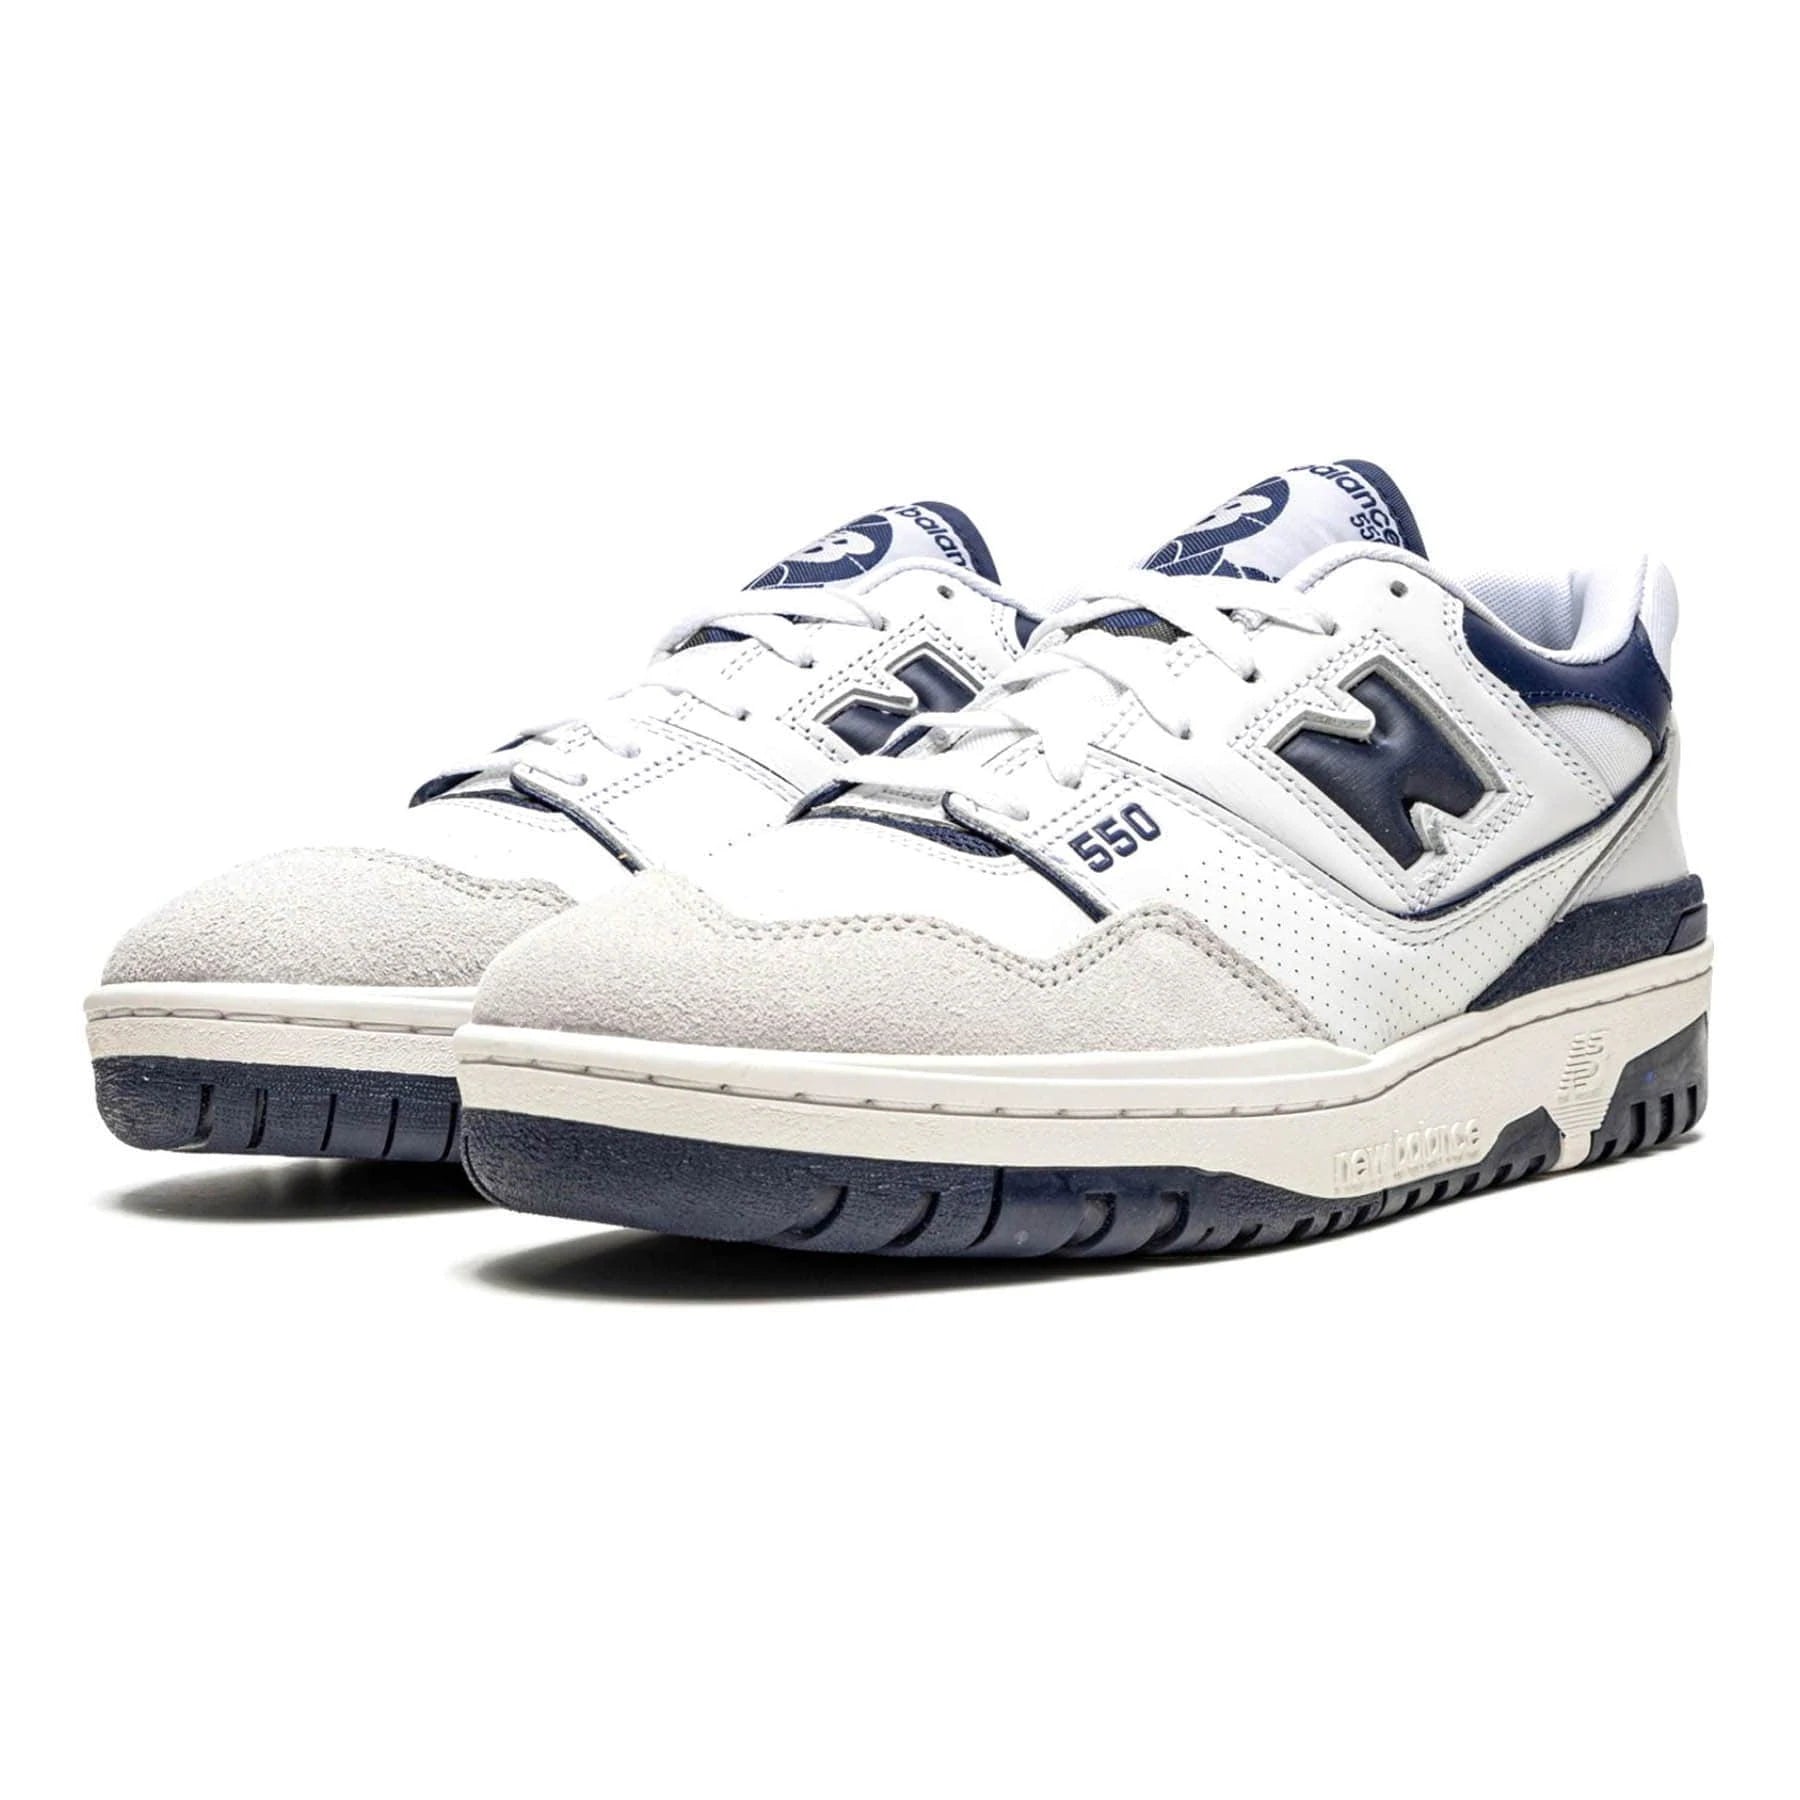 Double Boxed  299.99 New Balance 550 White Navy Double Boxed